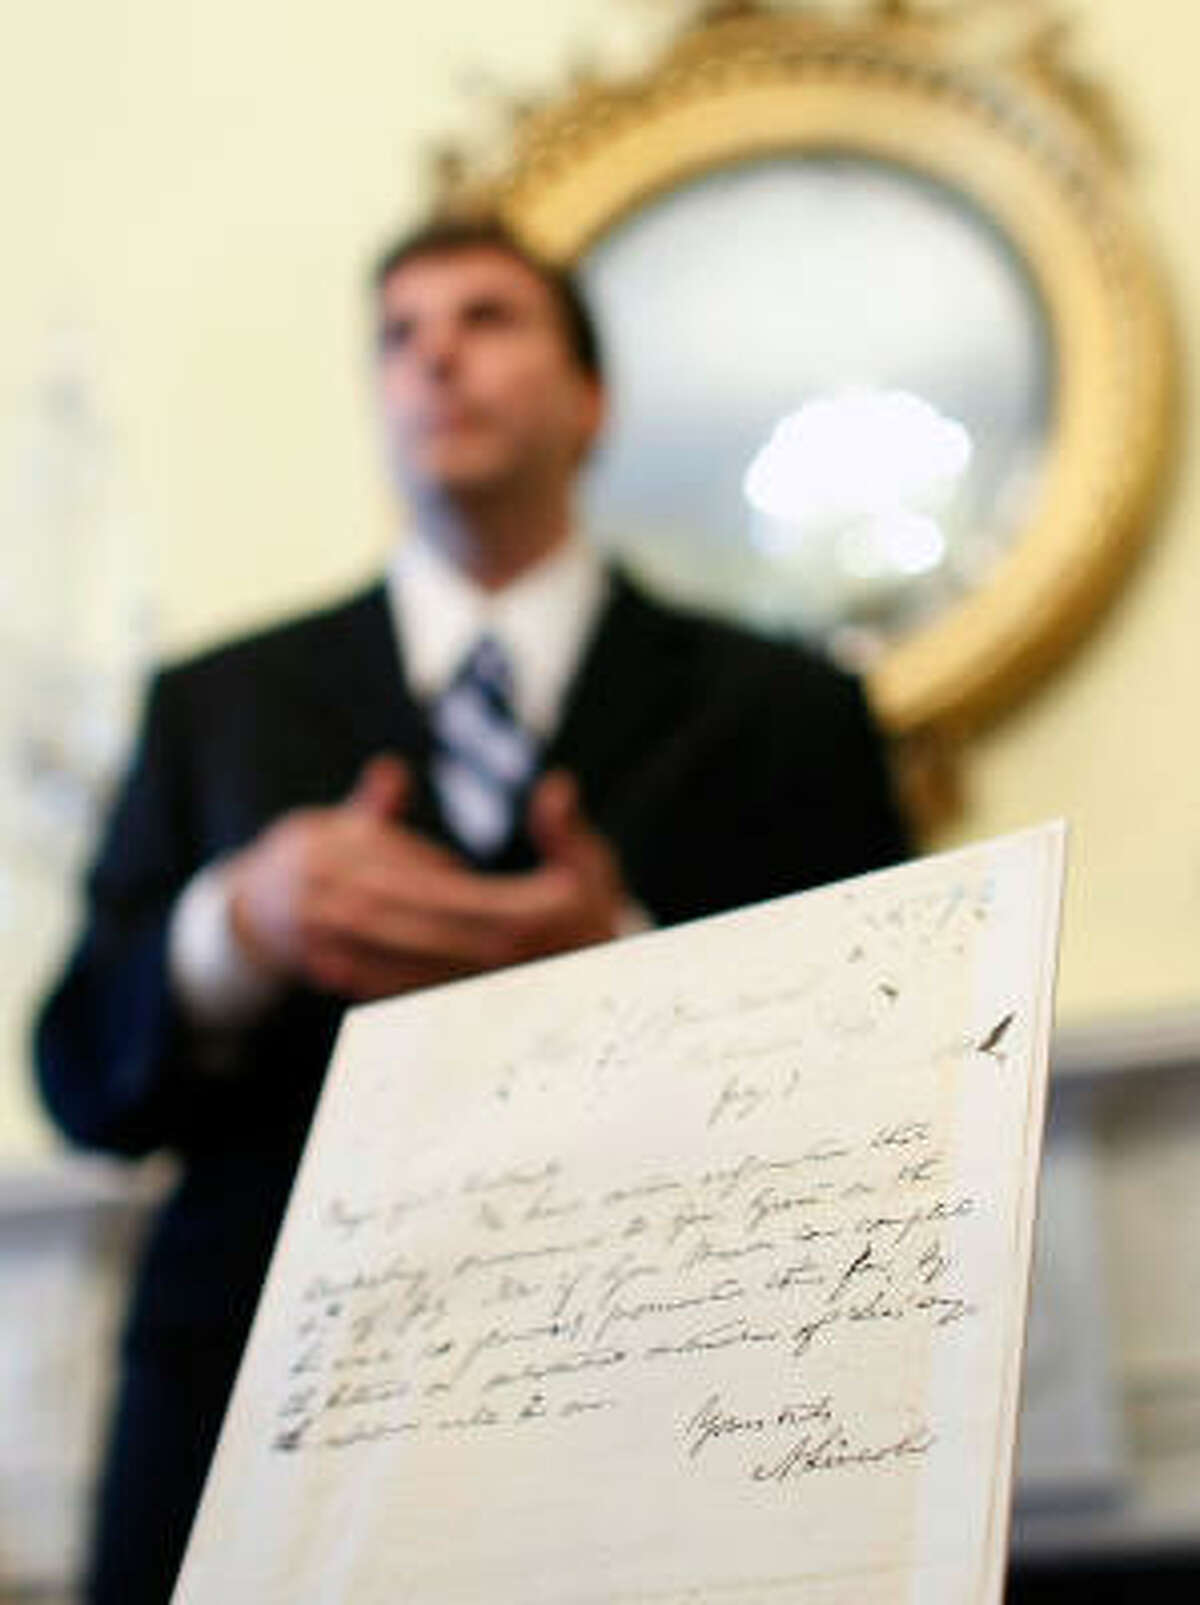 Trevor Plante, a specialist in Civil War records, displays the letter written by Abraham Lincoln at the National Archives in Washington on Thursday.